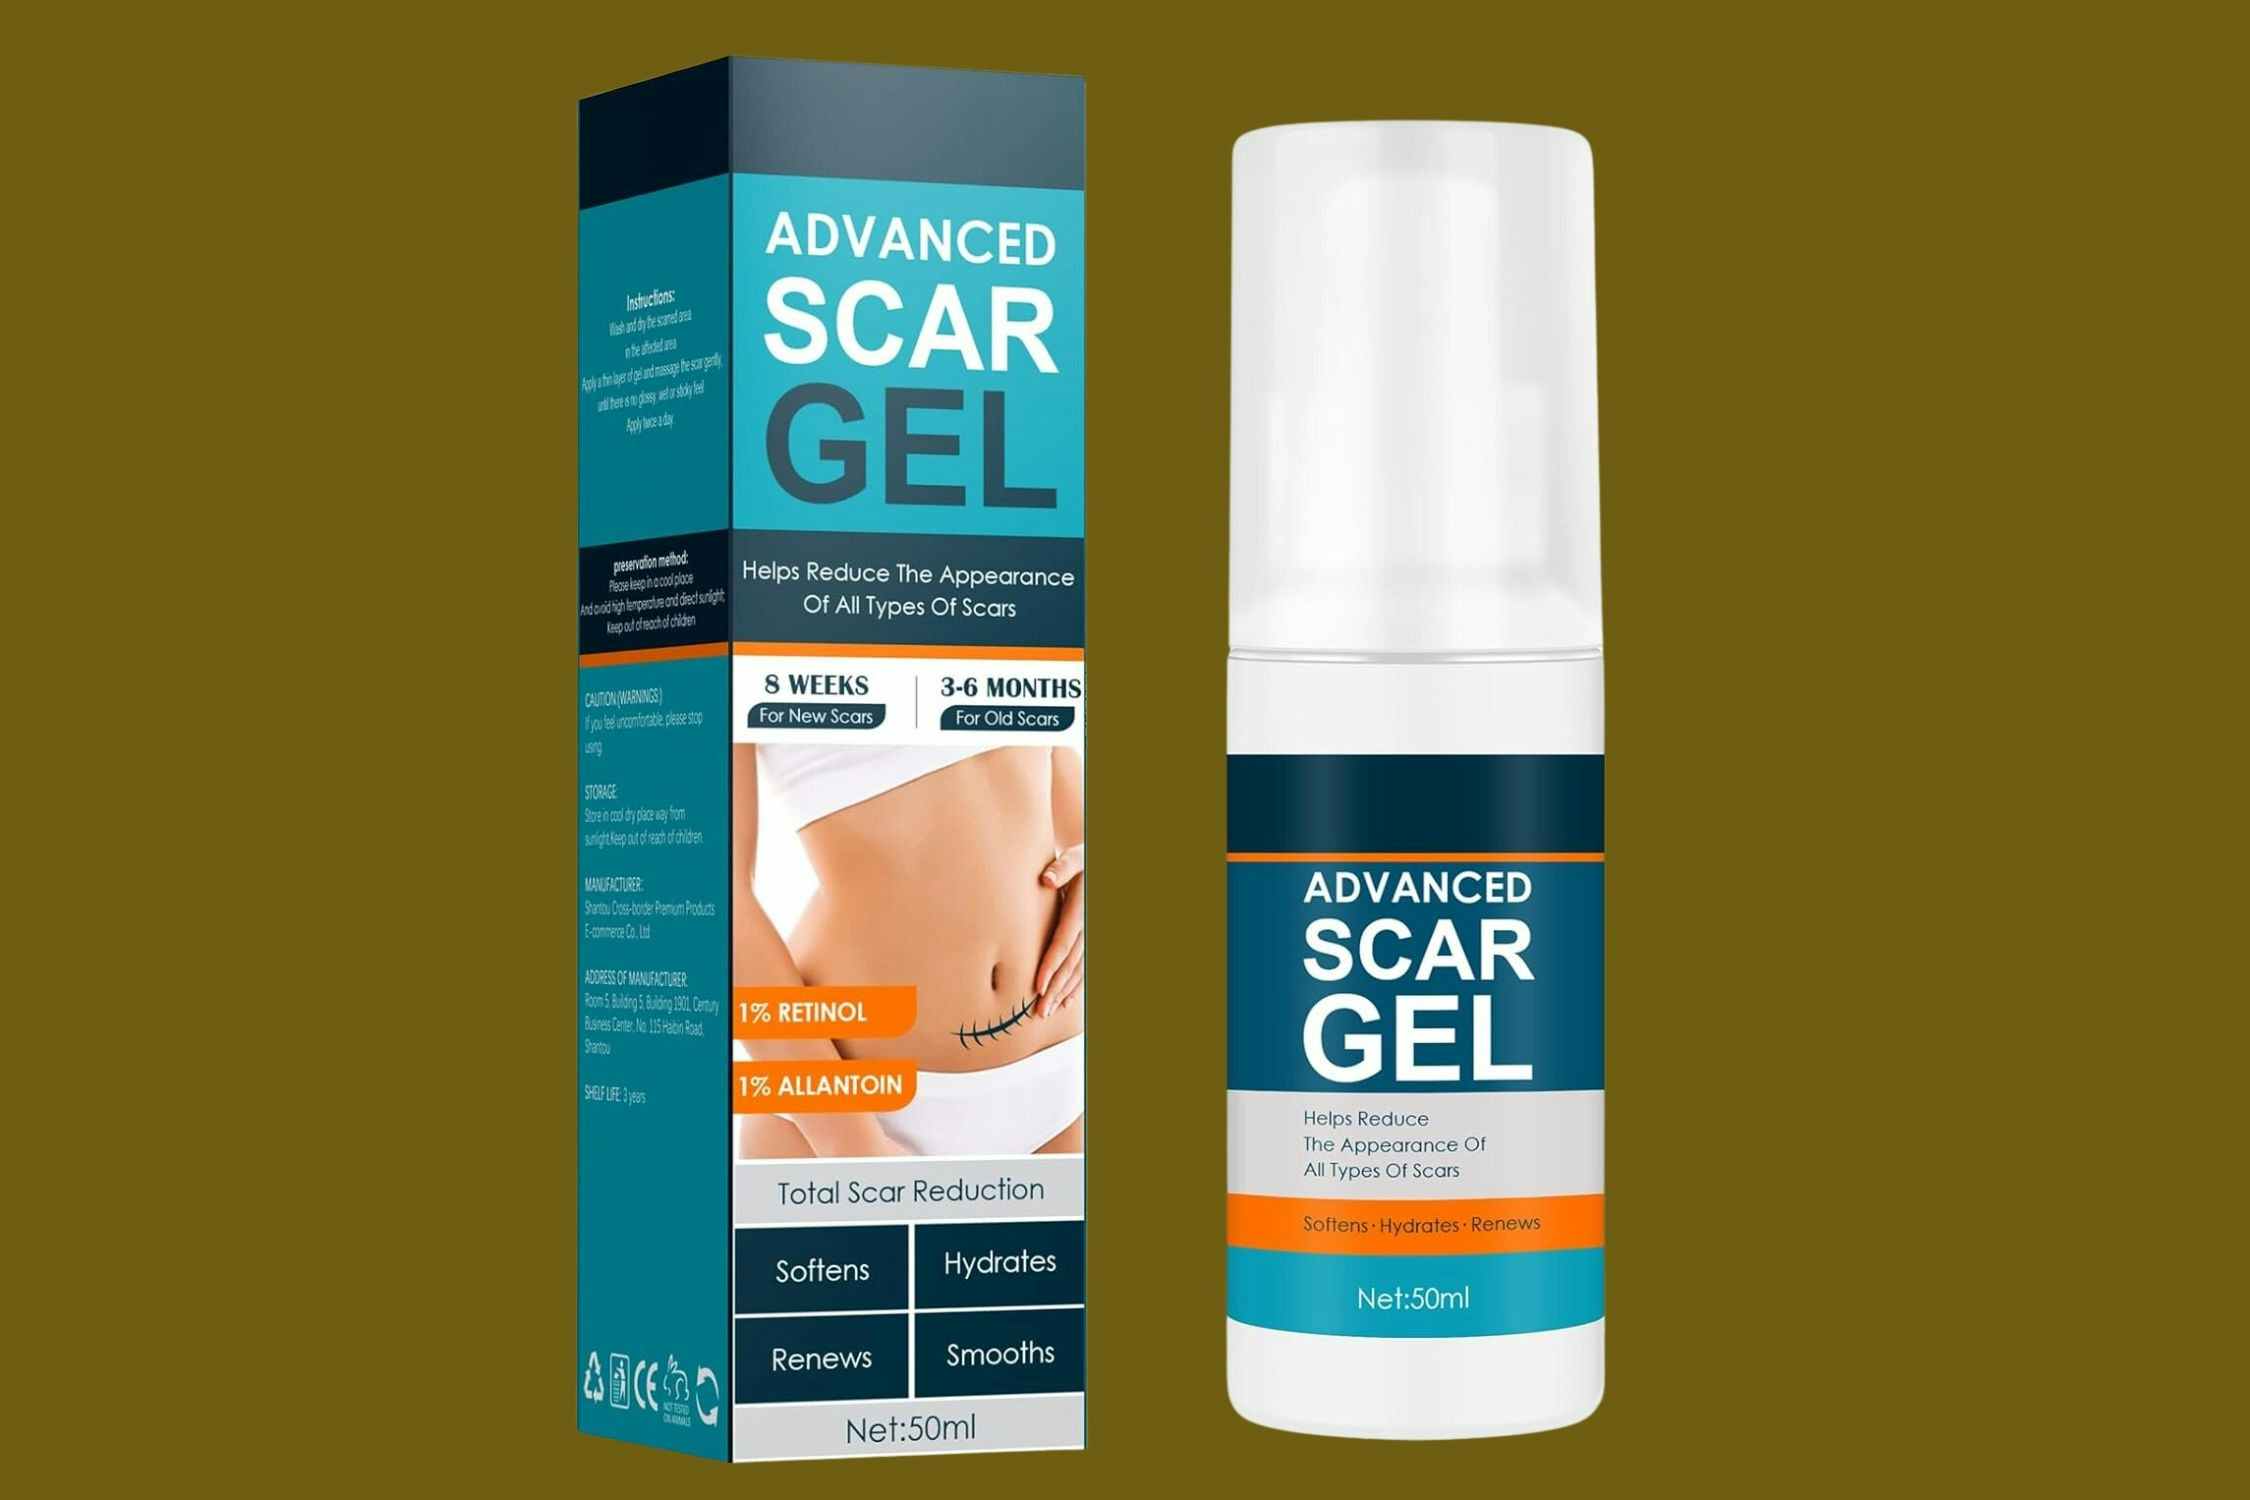 Get a Bottle of Scar Gel for as Low as $3.49 on Amazon